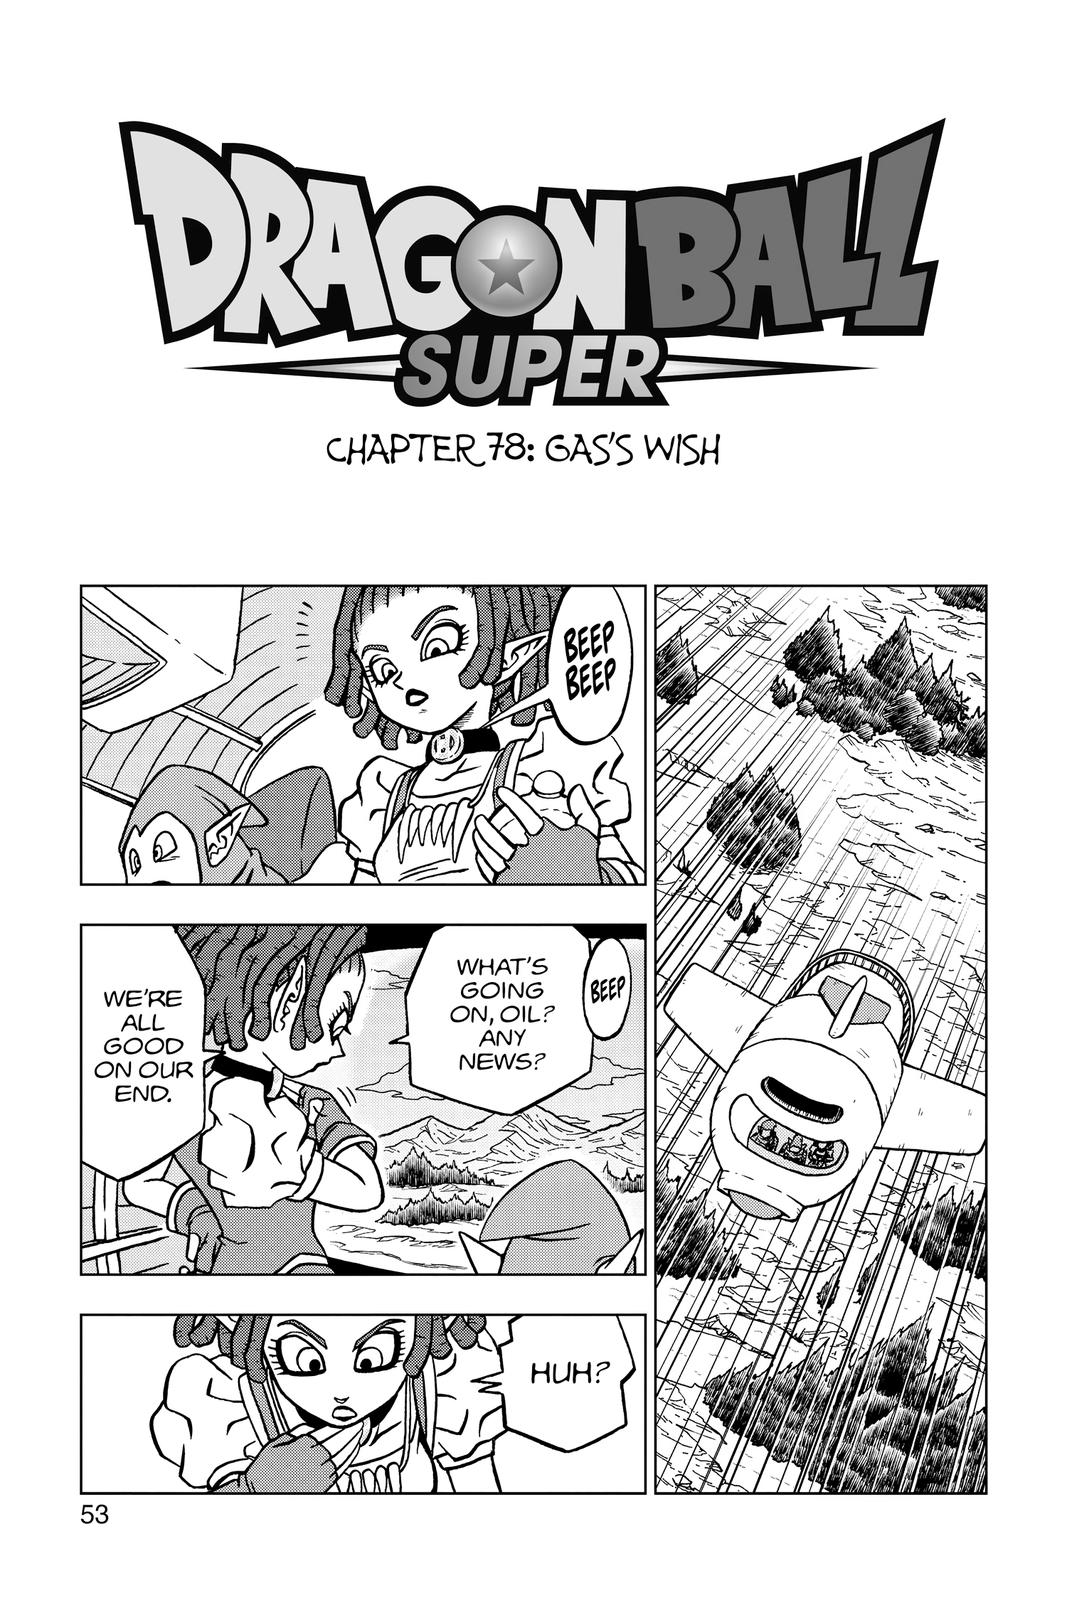 Dragon Ball Super Chapter 92: What to expect?